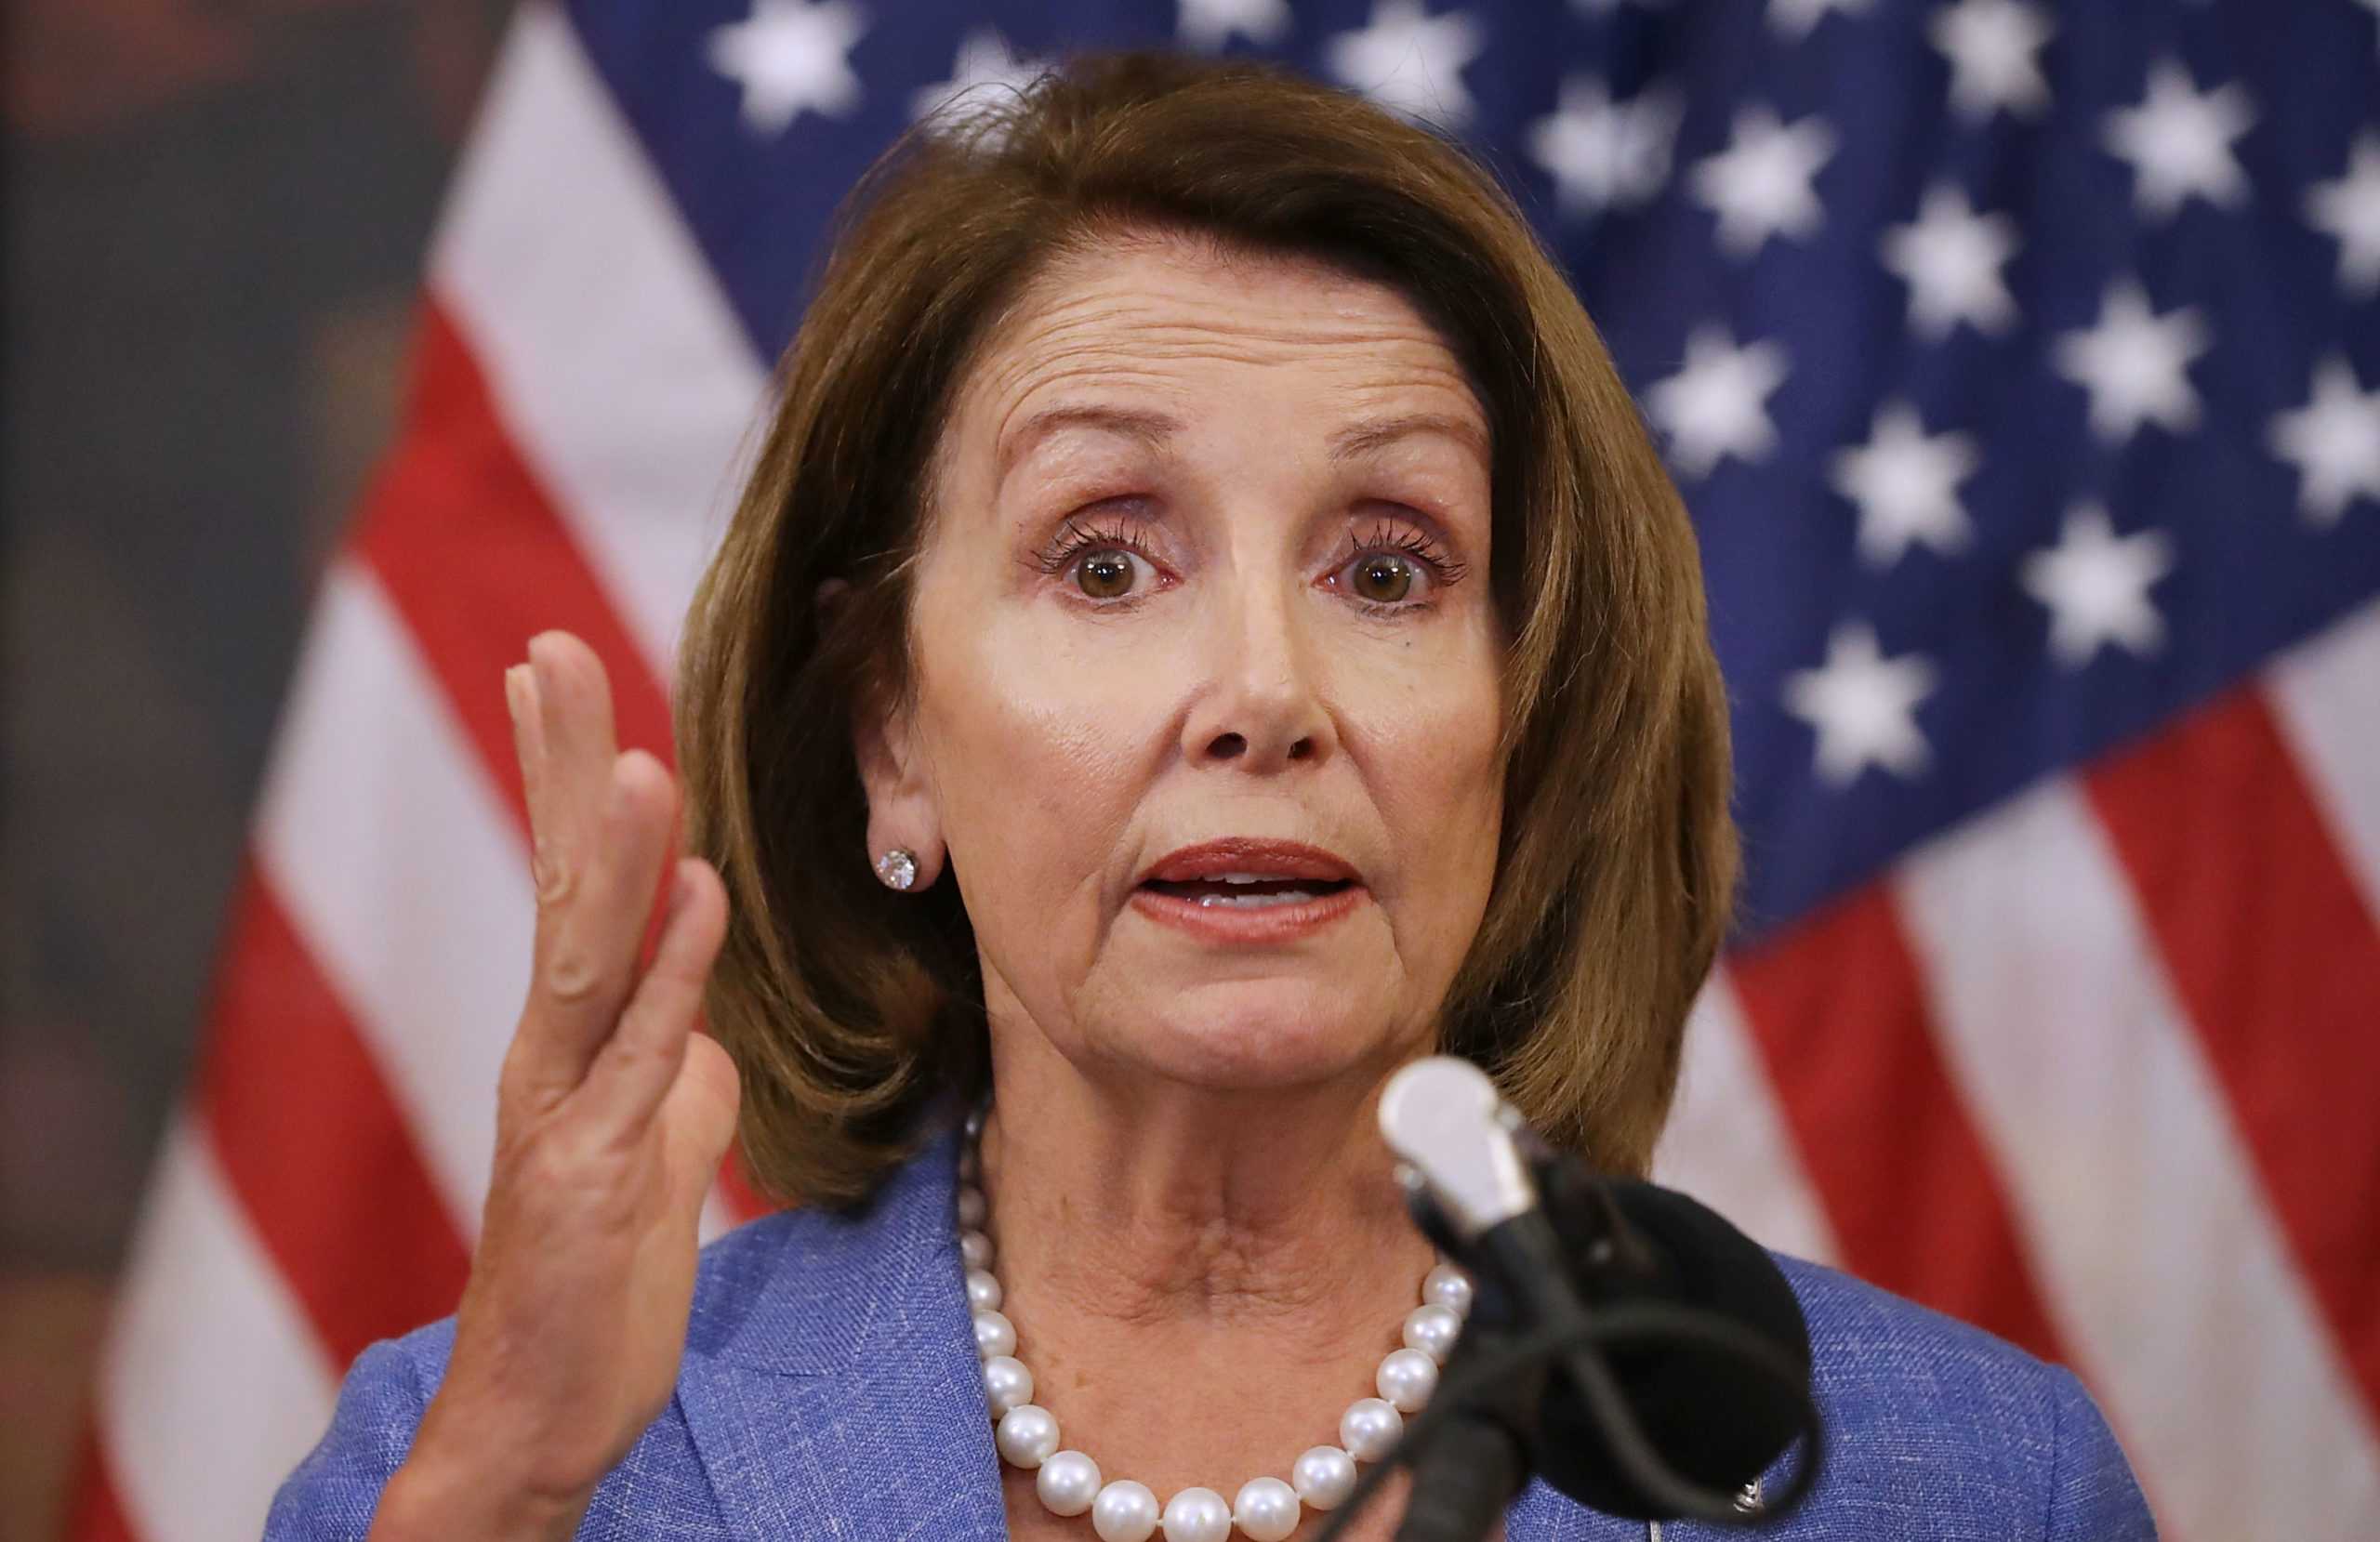 Nancy Pelosi Booed as She Takes the Stage at New York City Event: Video